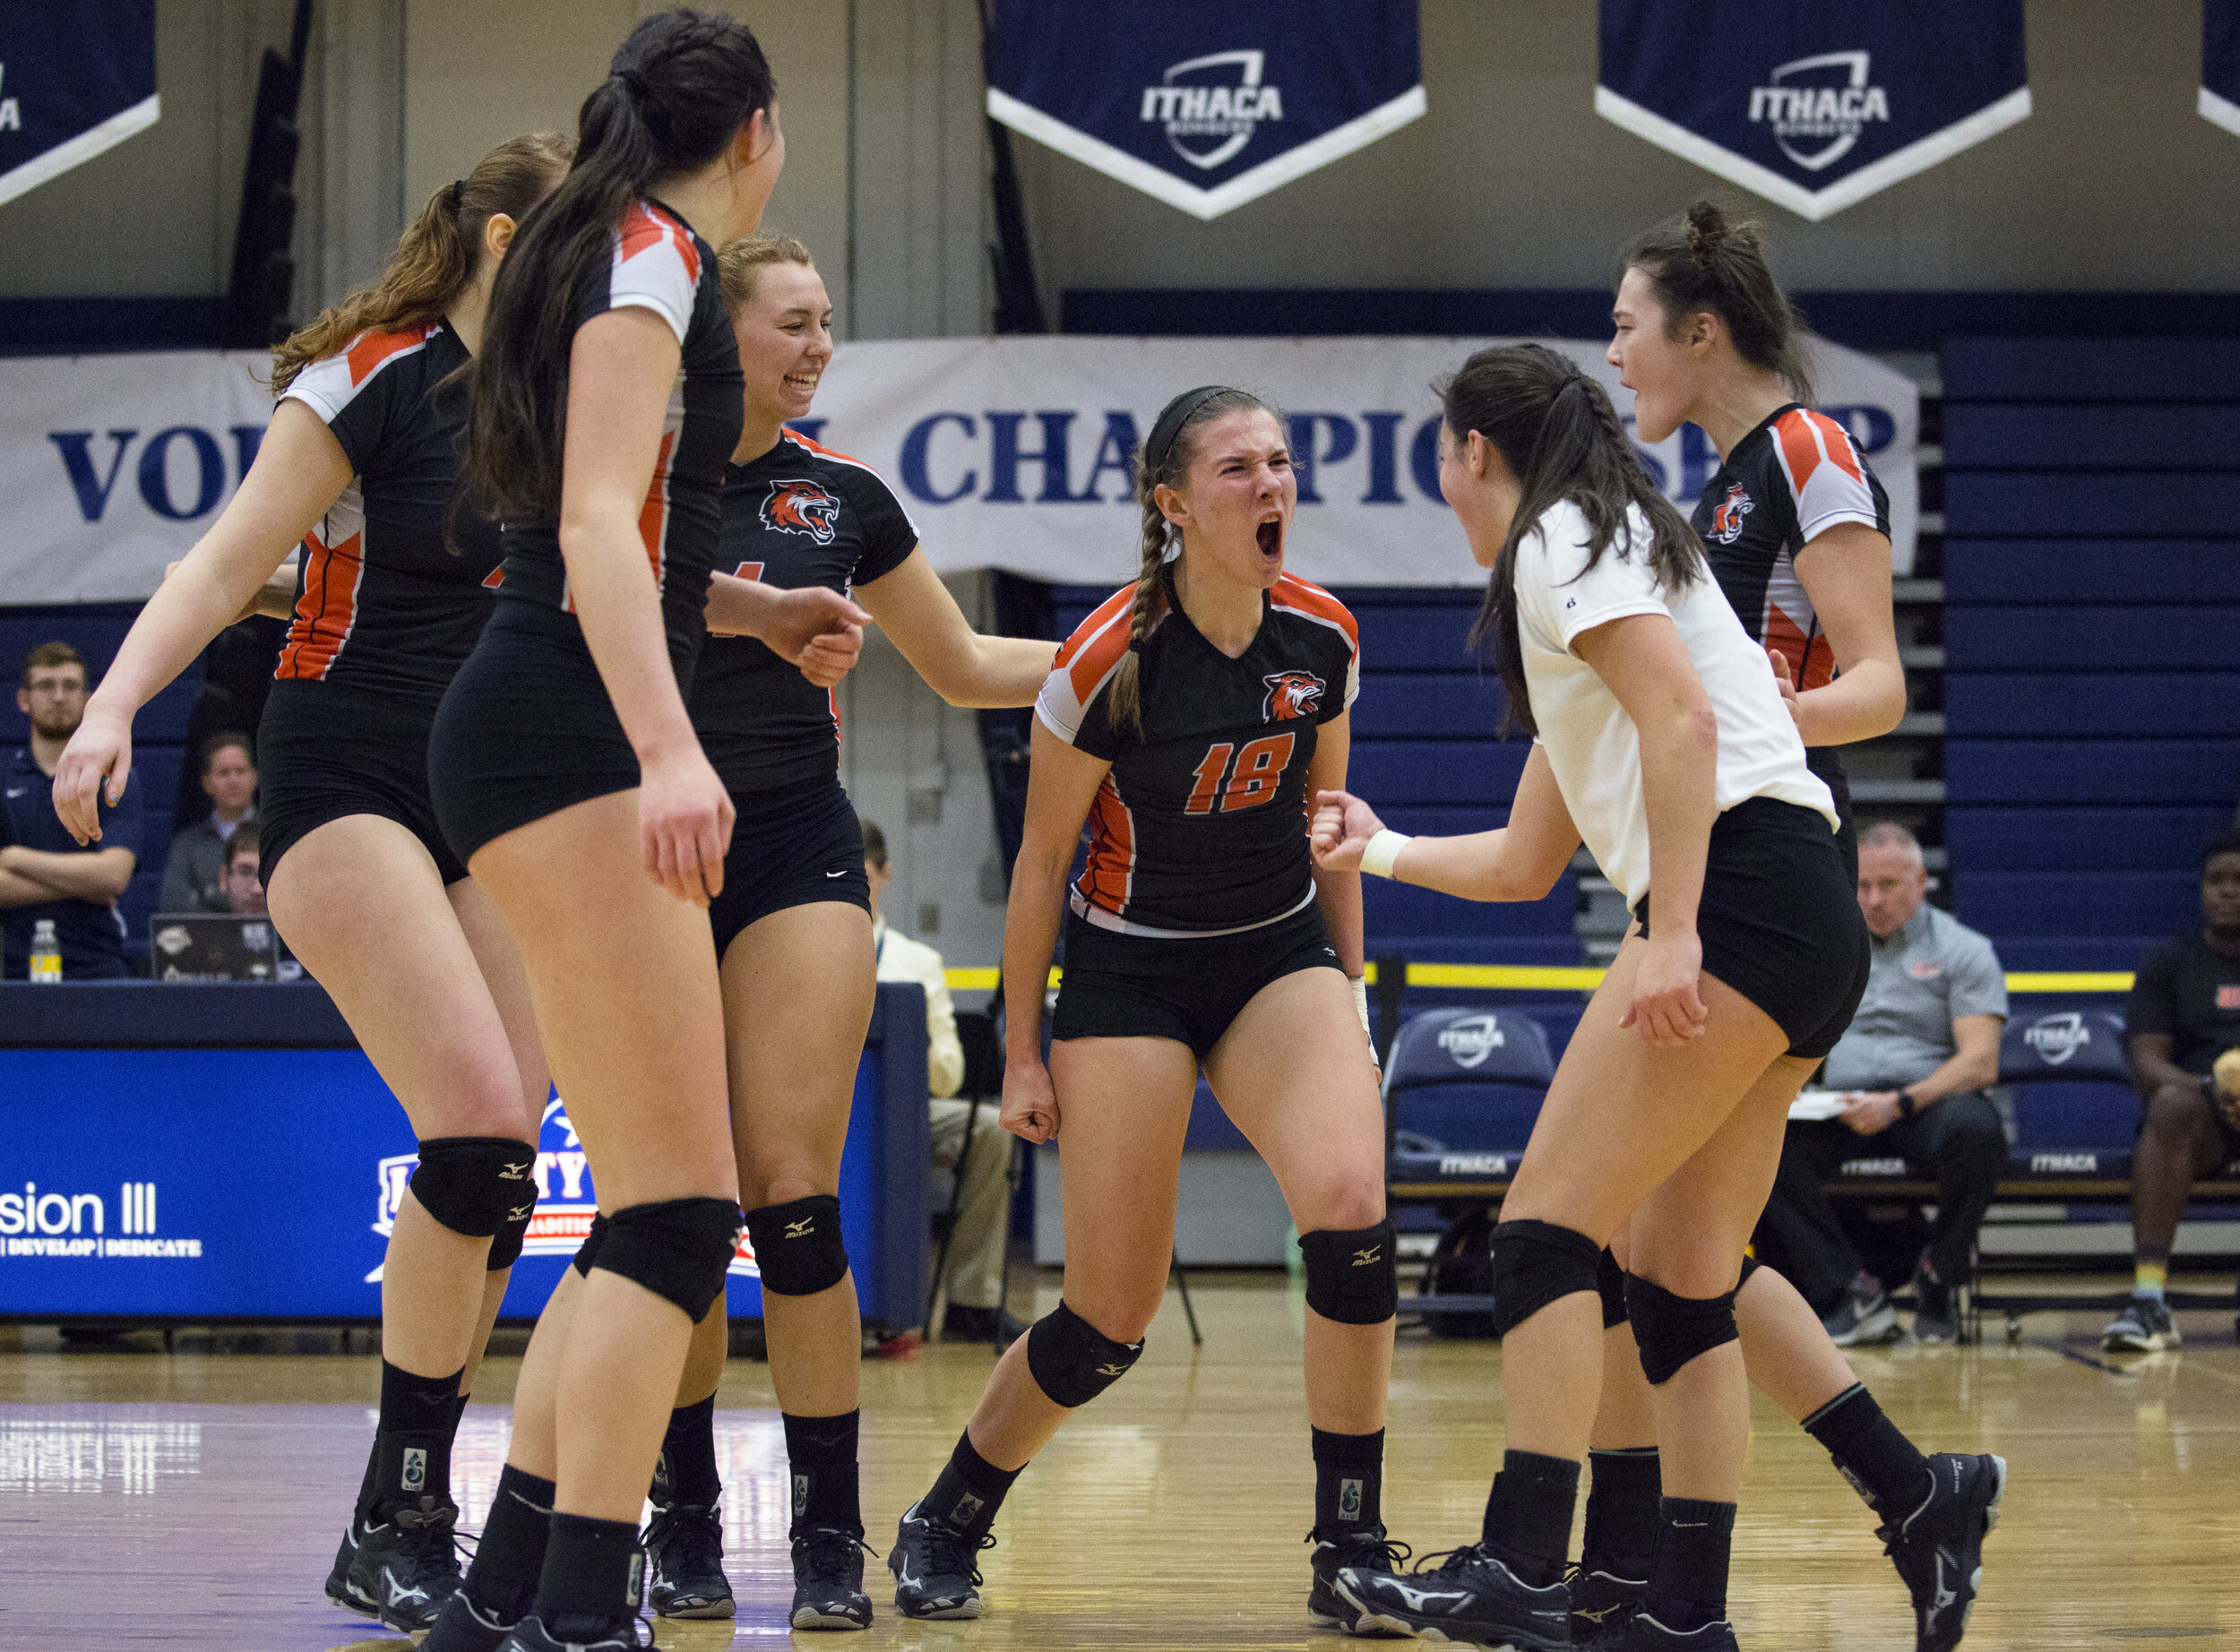  Erin Parkinson (18, center) cheers after winning a point during the Liberty League Finals against Clarkson University on Nov. 3, 2018 at Ben Light Gymnasium in Ithaca, N.Y. RIT defeated Clarkson in the fourth set to win their first championship in L